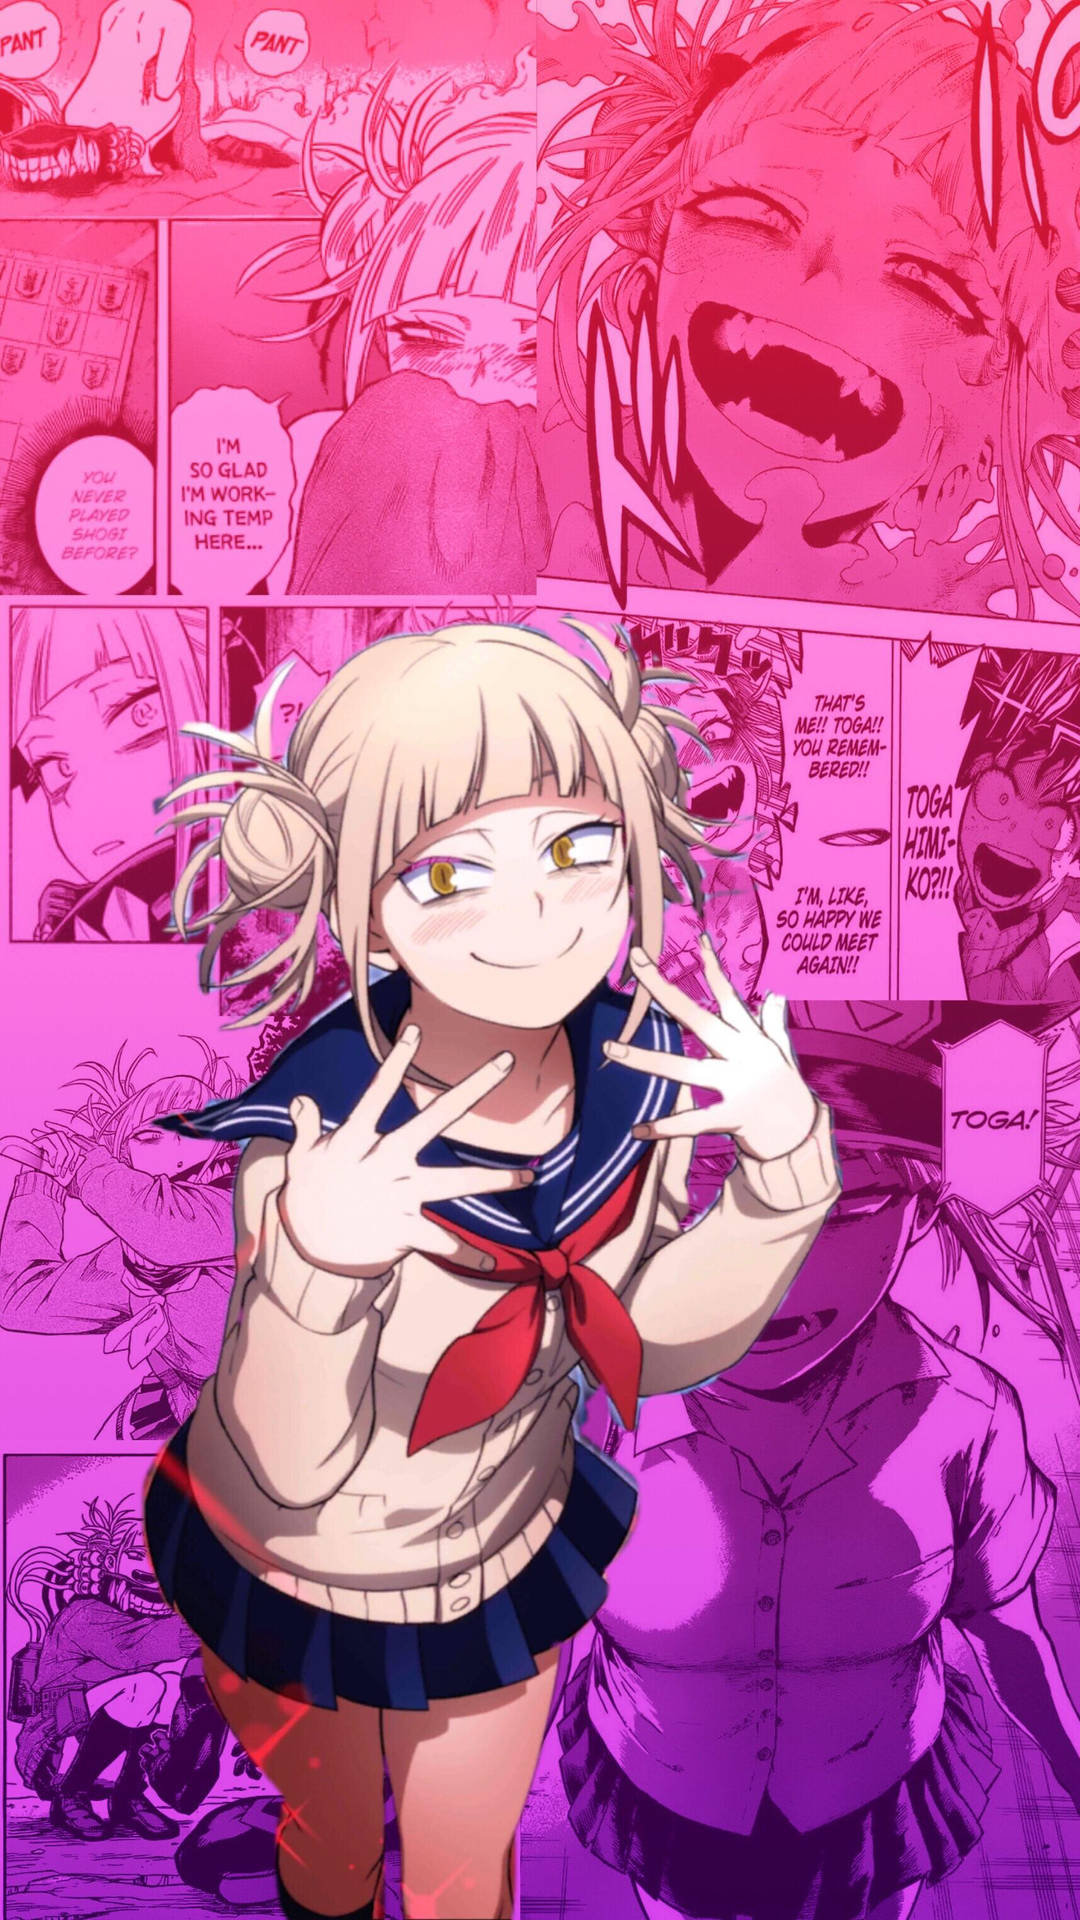 1717X3053 Himiko Toga Wallpaper and Background